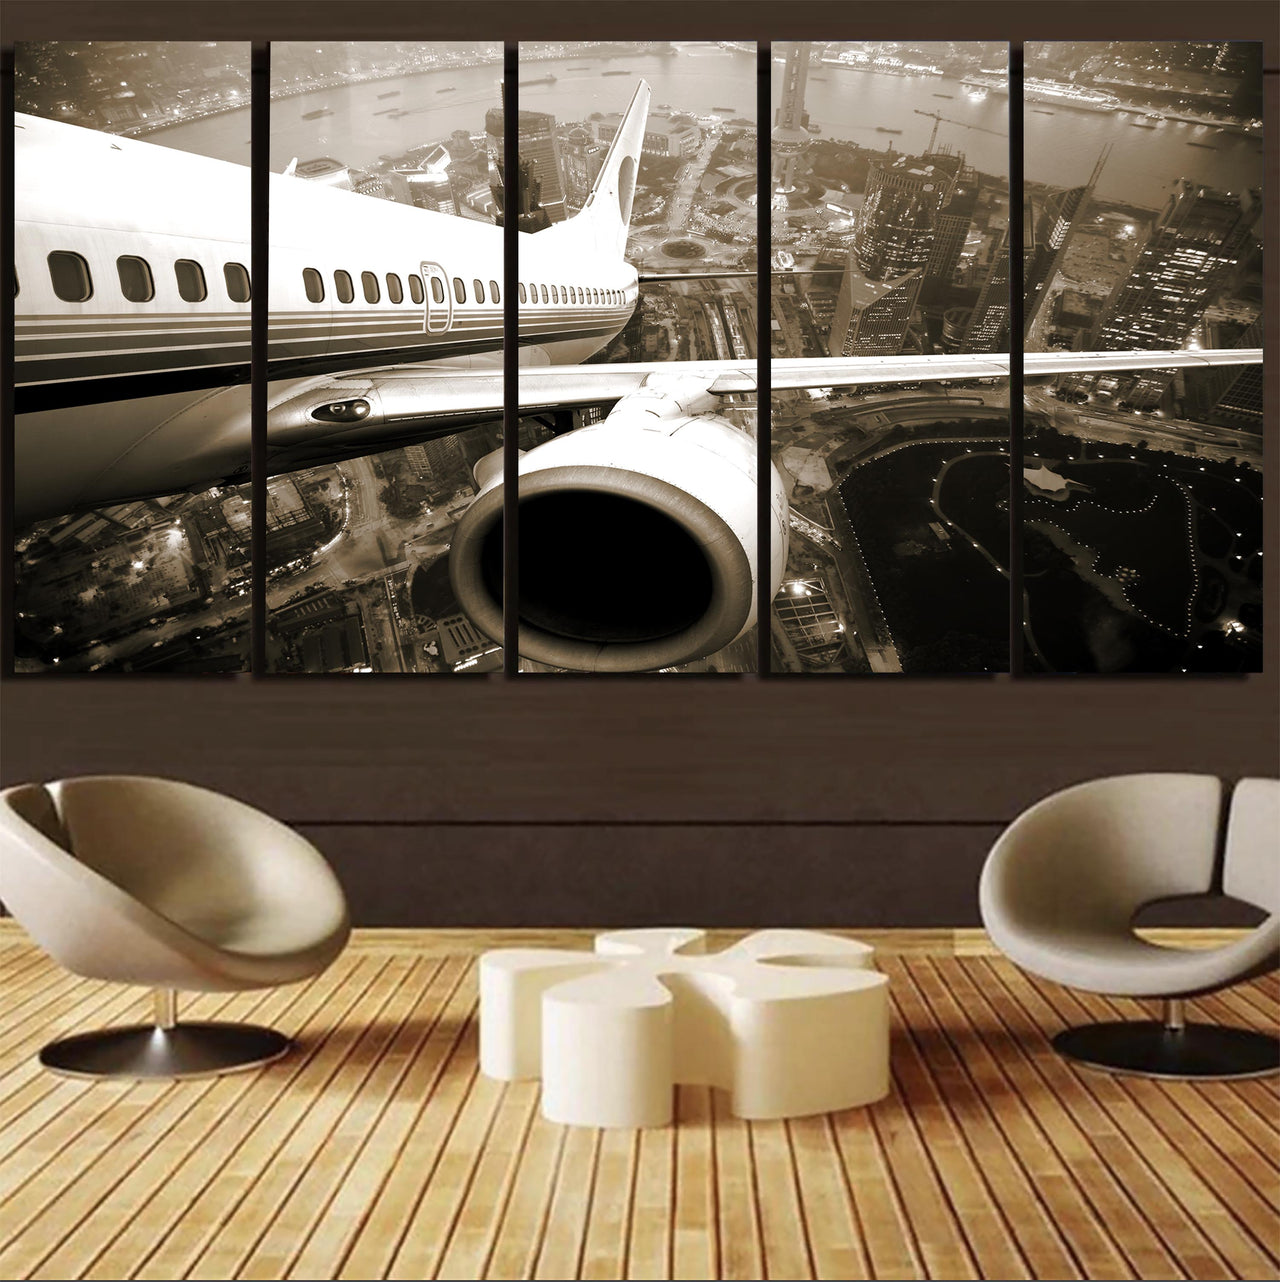 Departing Aircraft & City Scene behind Printed Canvas Prints (5 Pieces)